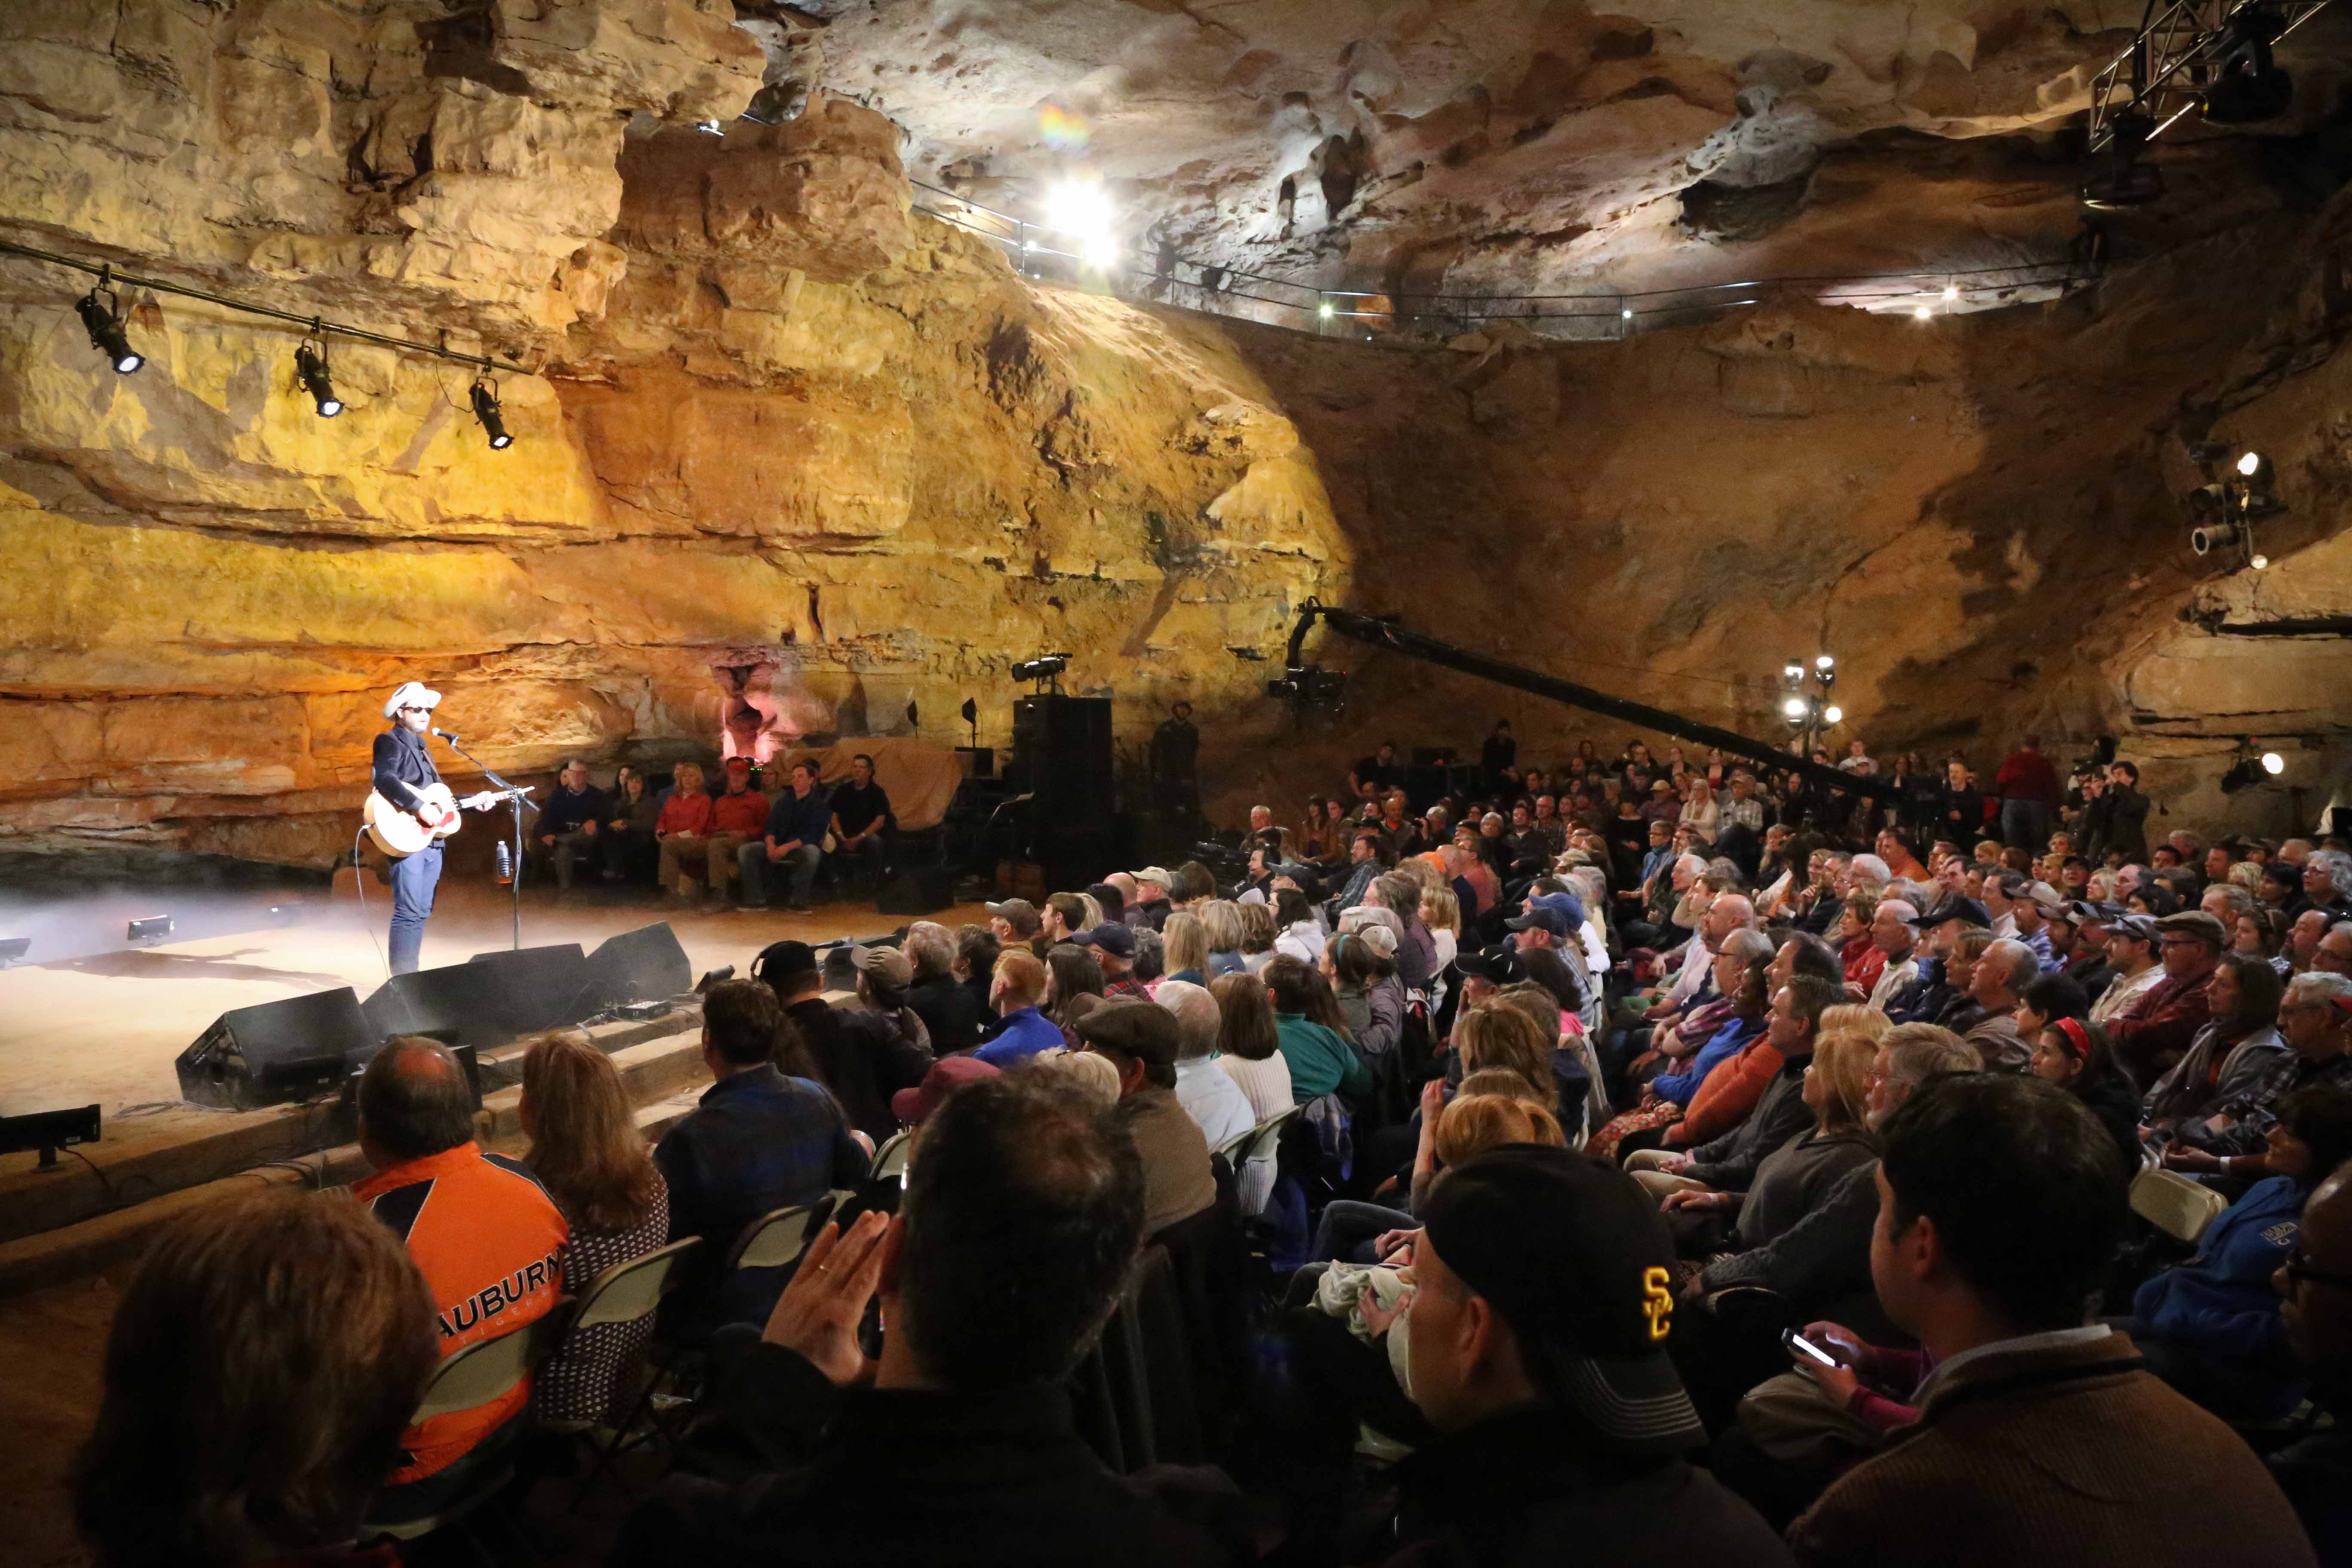 Bluegrass Underground, deep in the belly of a Tennessee cave, is one of the most surreal concerts you'll ever experience.